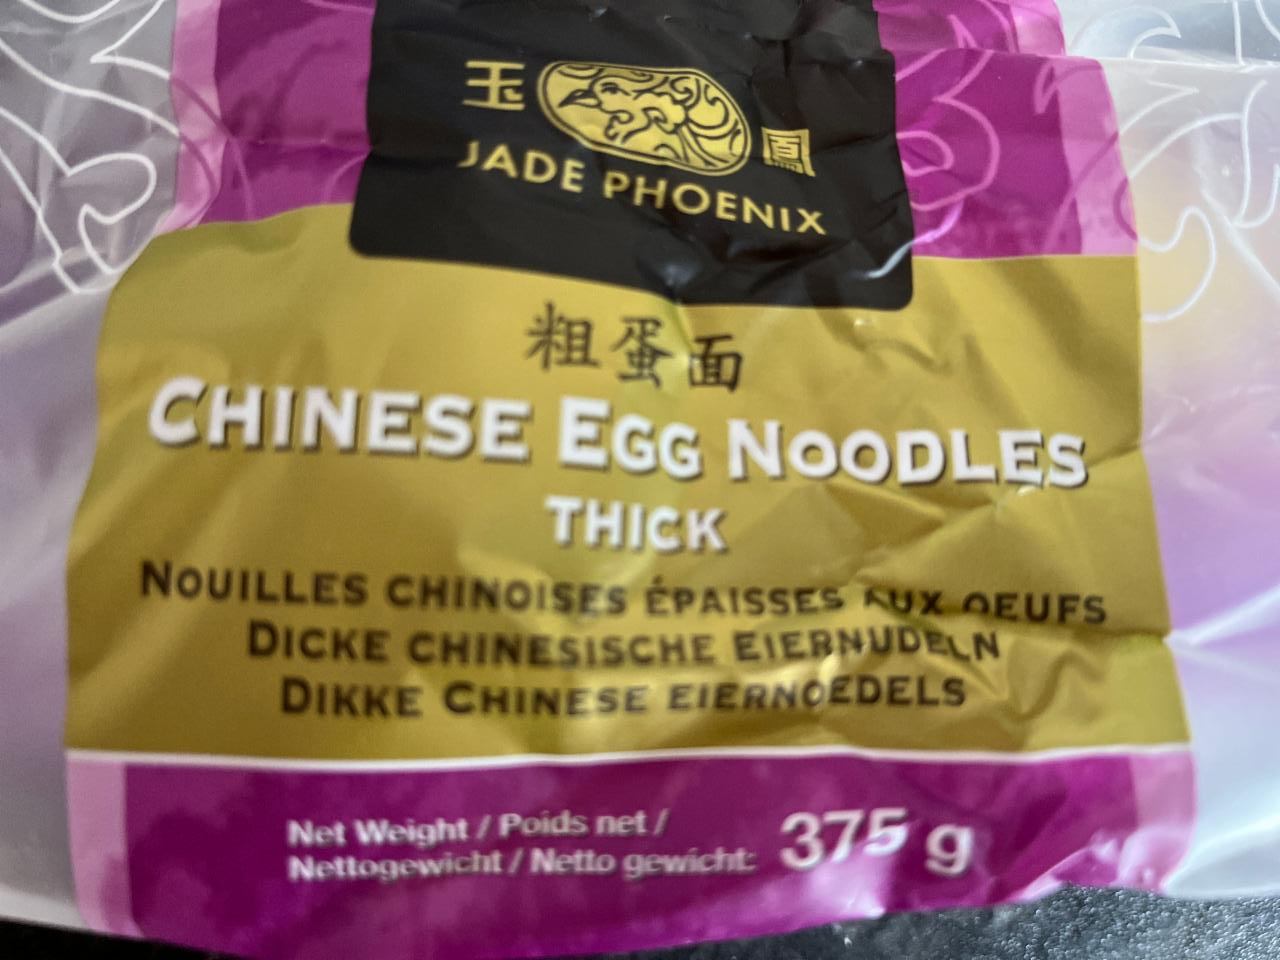 Fotografie - Chinese Egg Thick Noodles Jade Phoenix